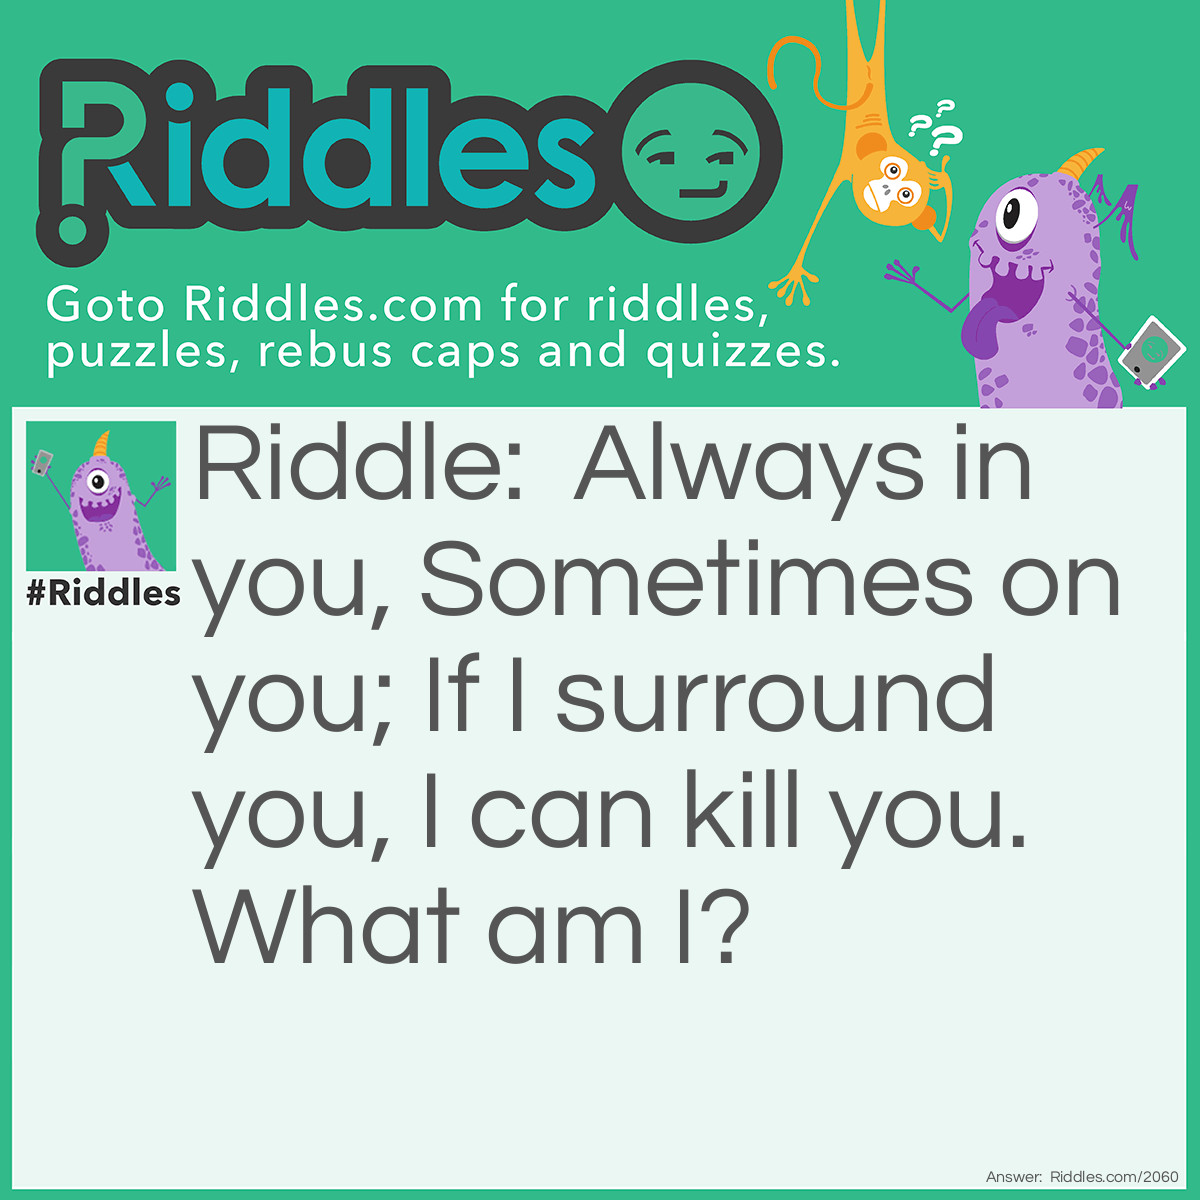 Riddle: Always in you, Sometimes on you;
If I surround you, I can kill you.
What am I? Answer: Water.